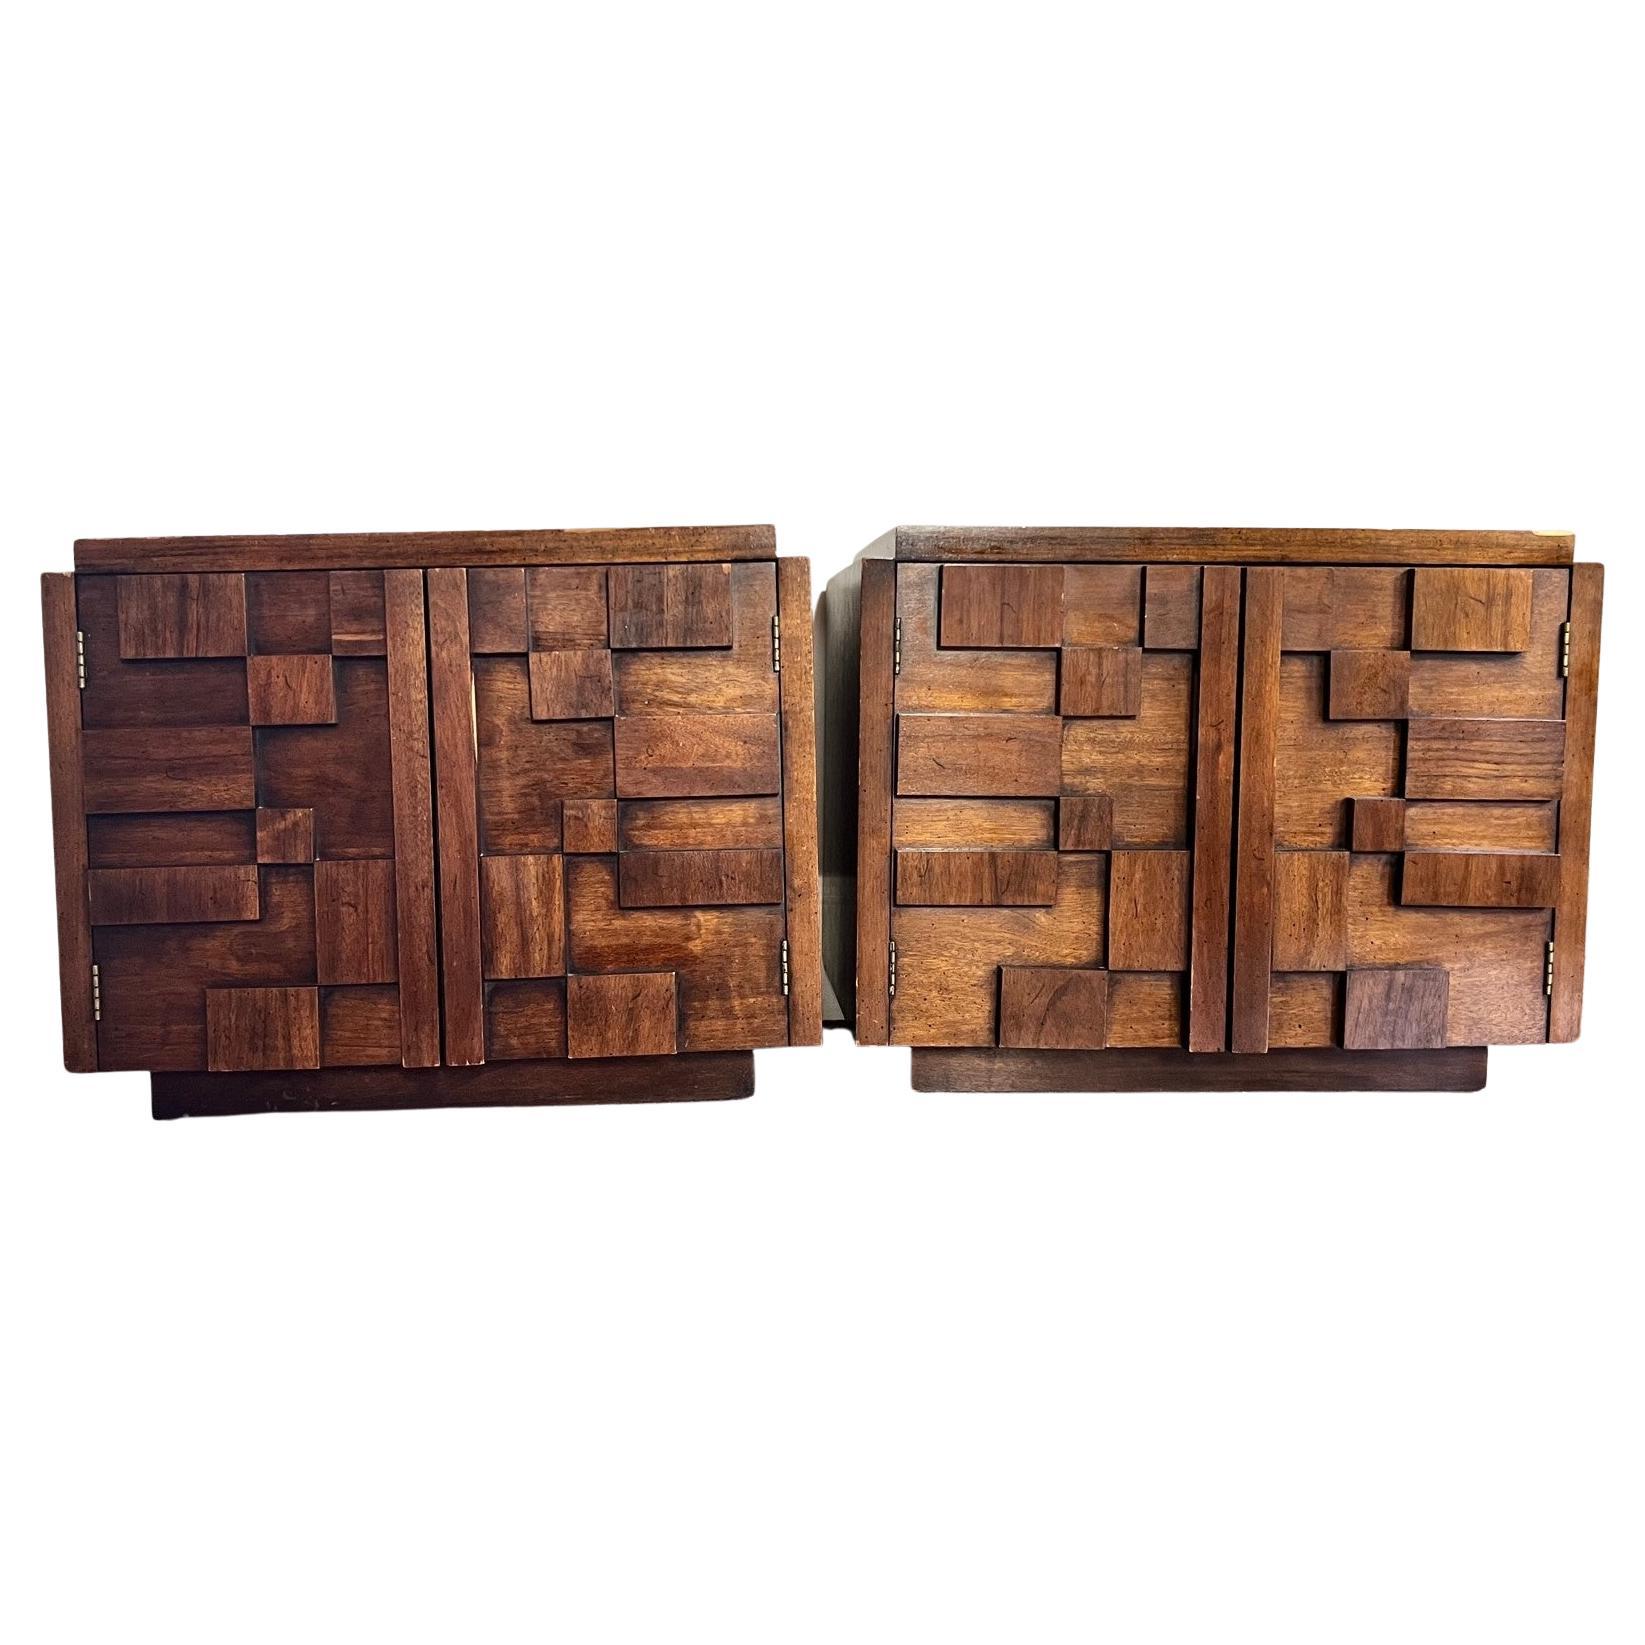 1970s Lane Brutalist Staccato Nightstands in Walnut, a Pair